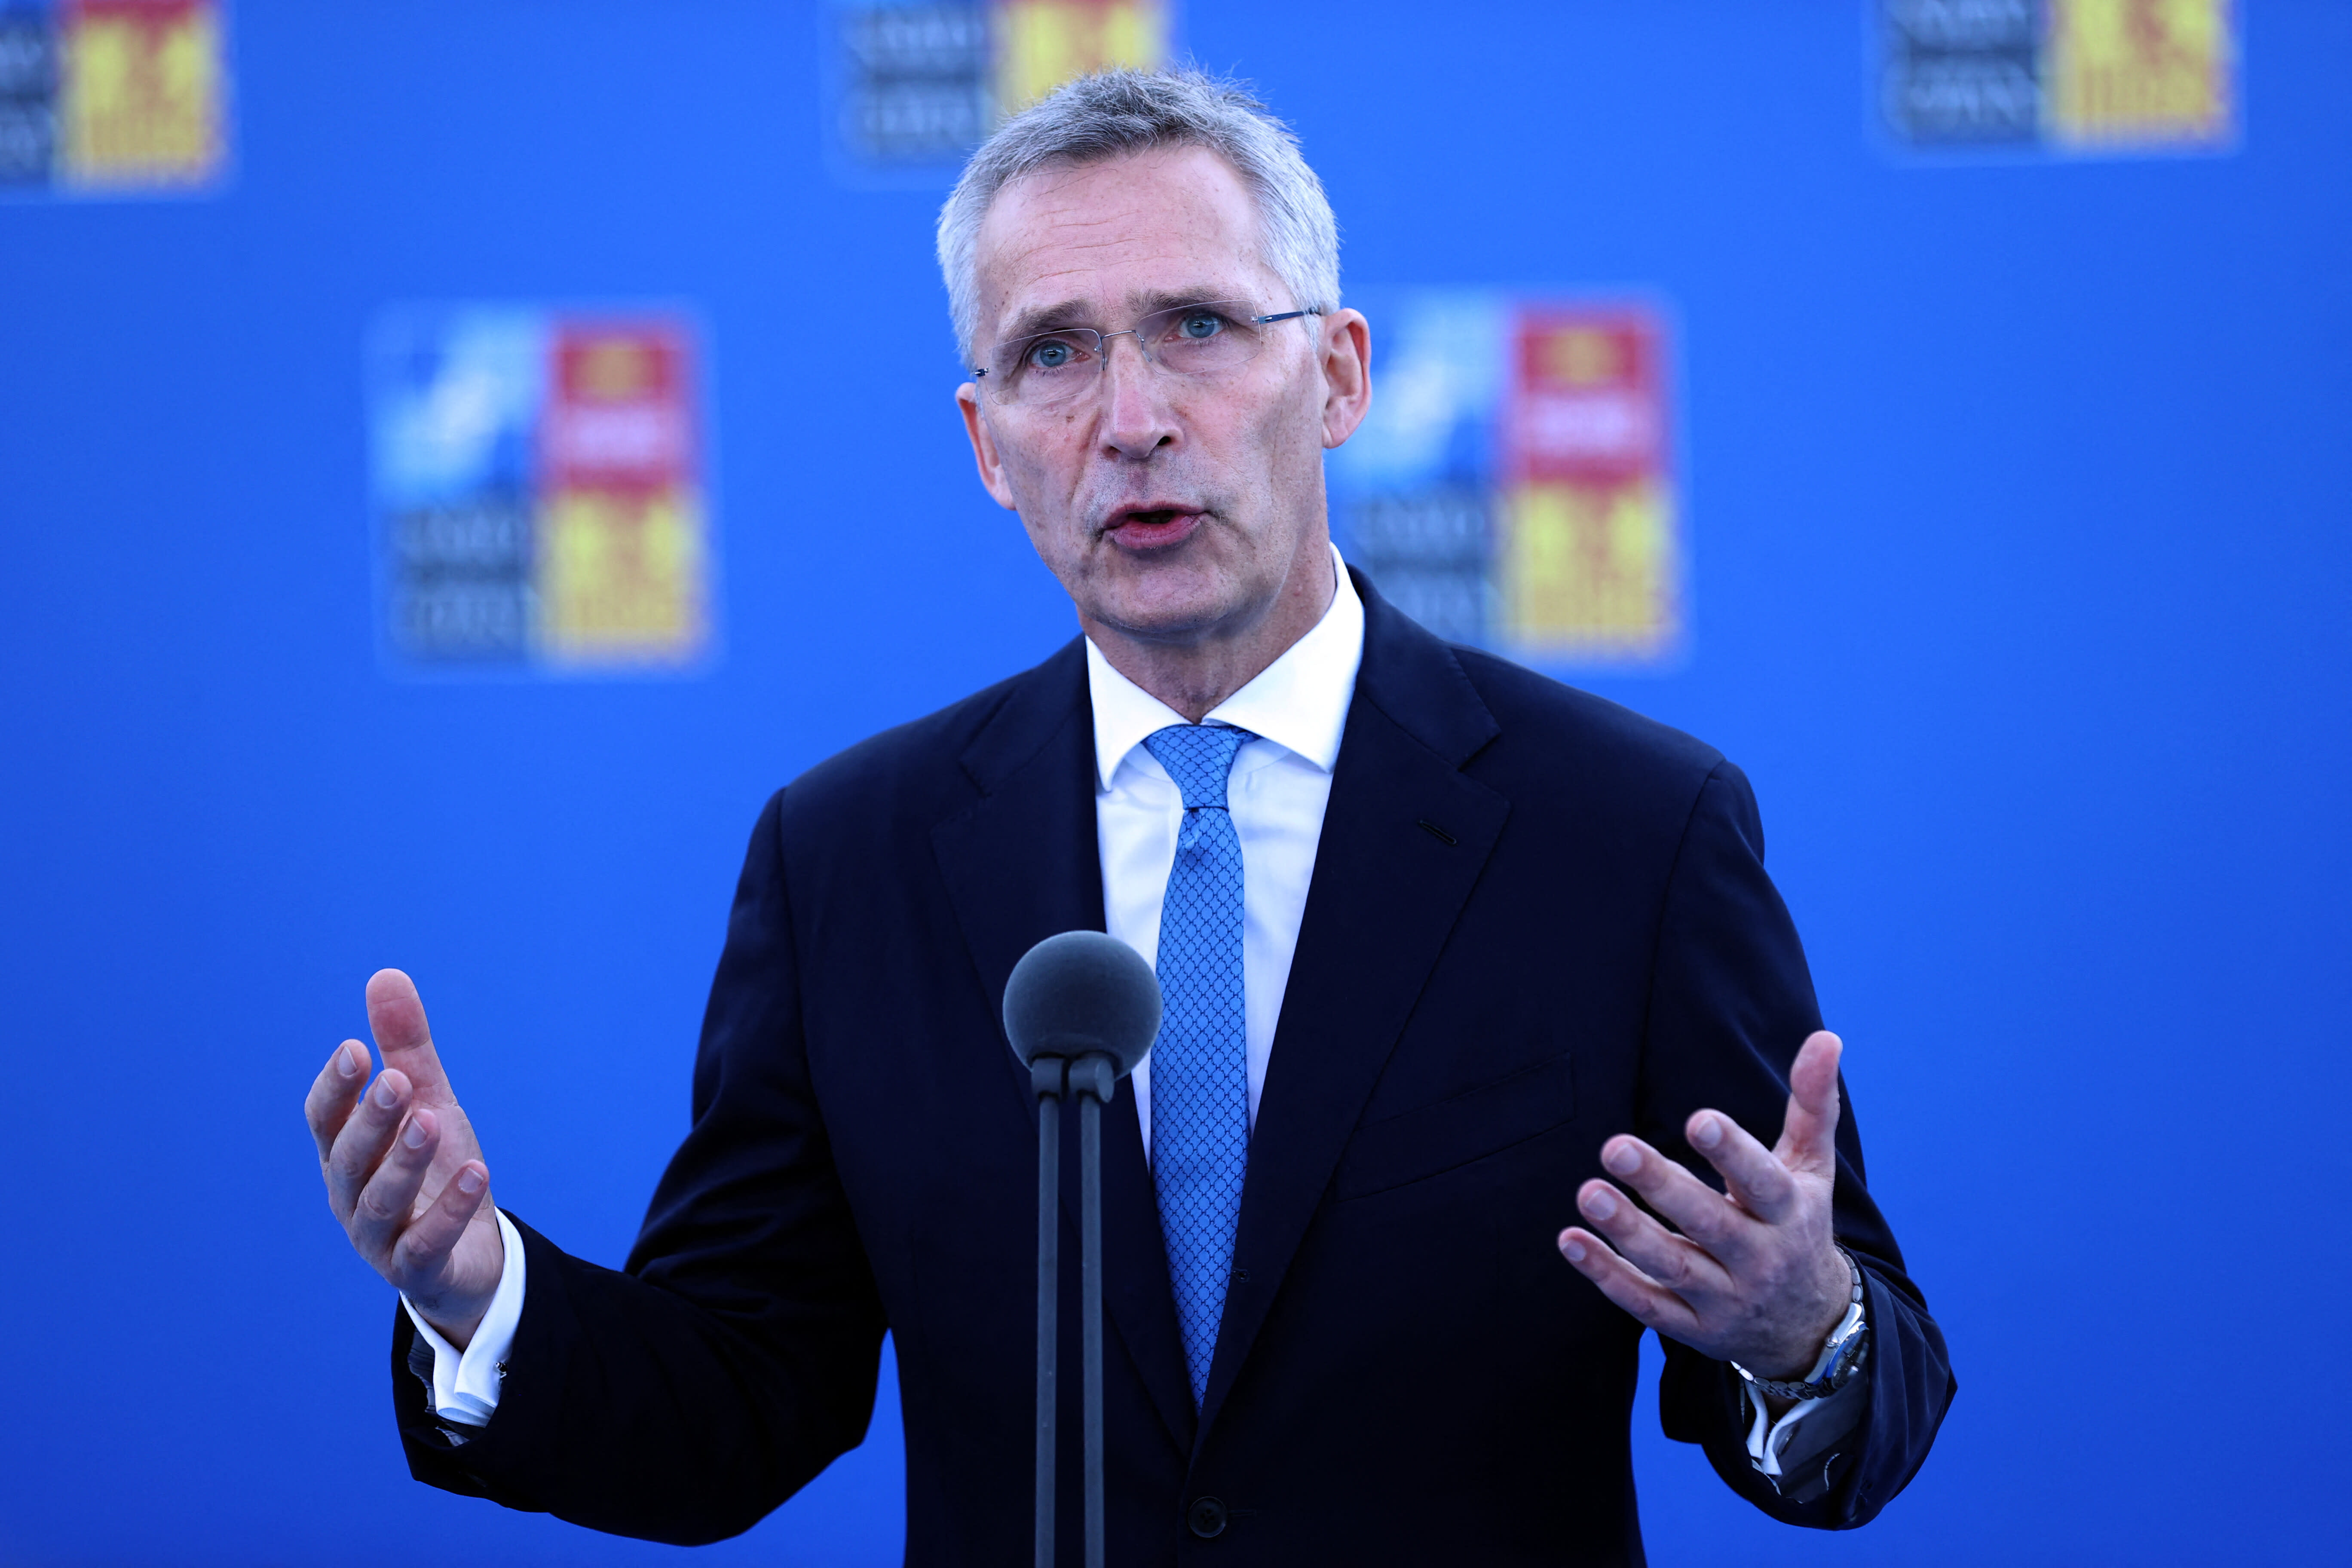 NATO chief: Finland and Sweden have the right to choose their own path